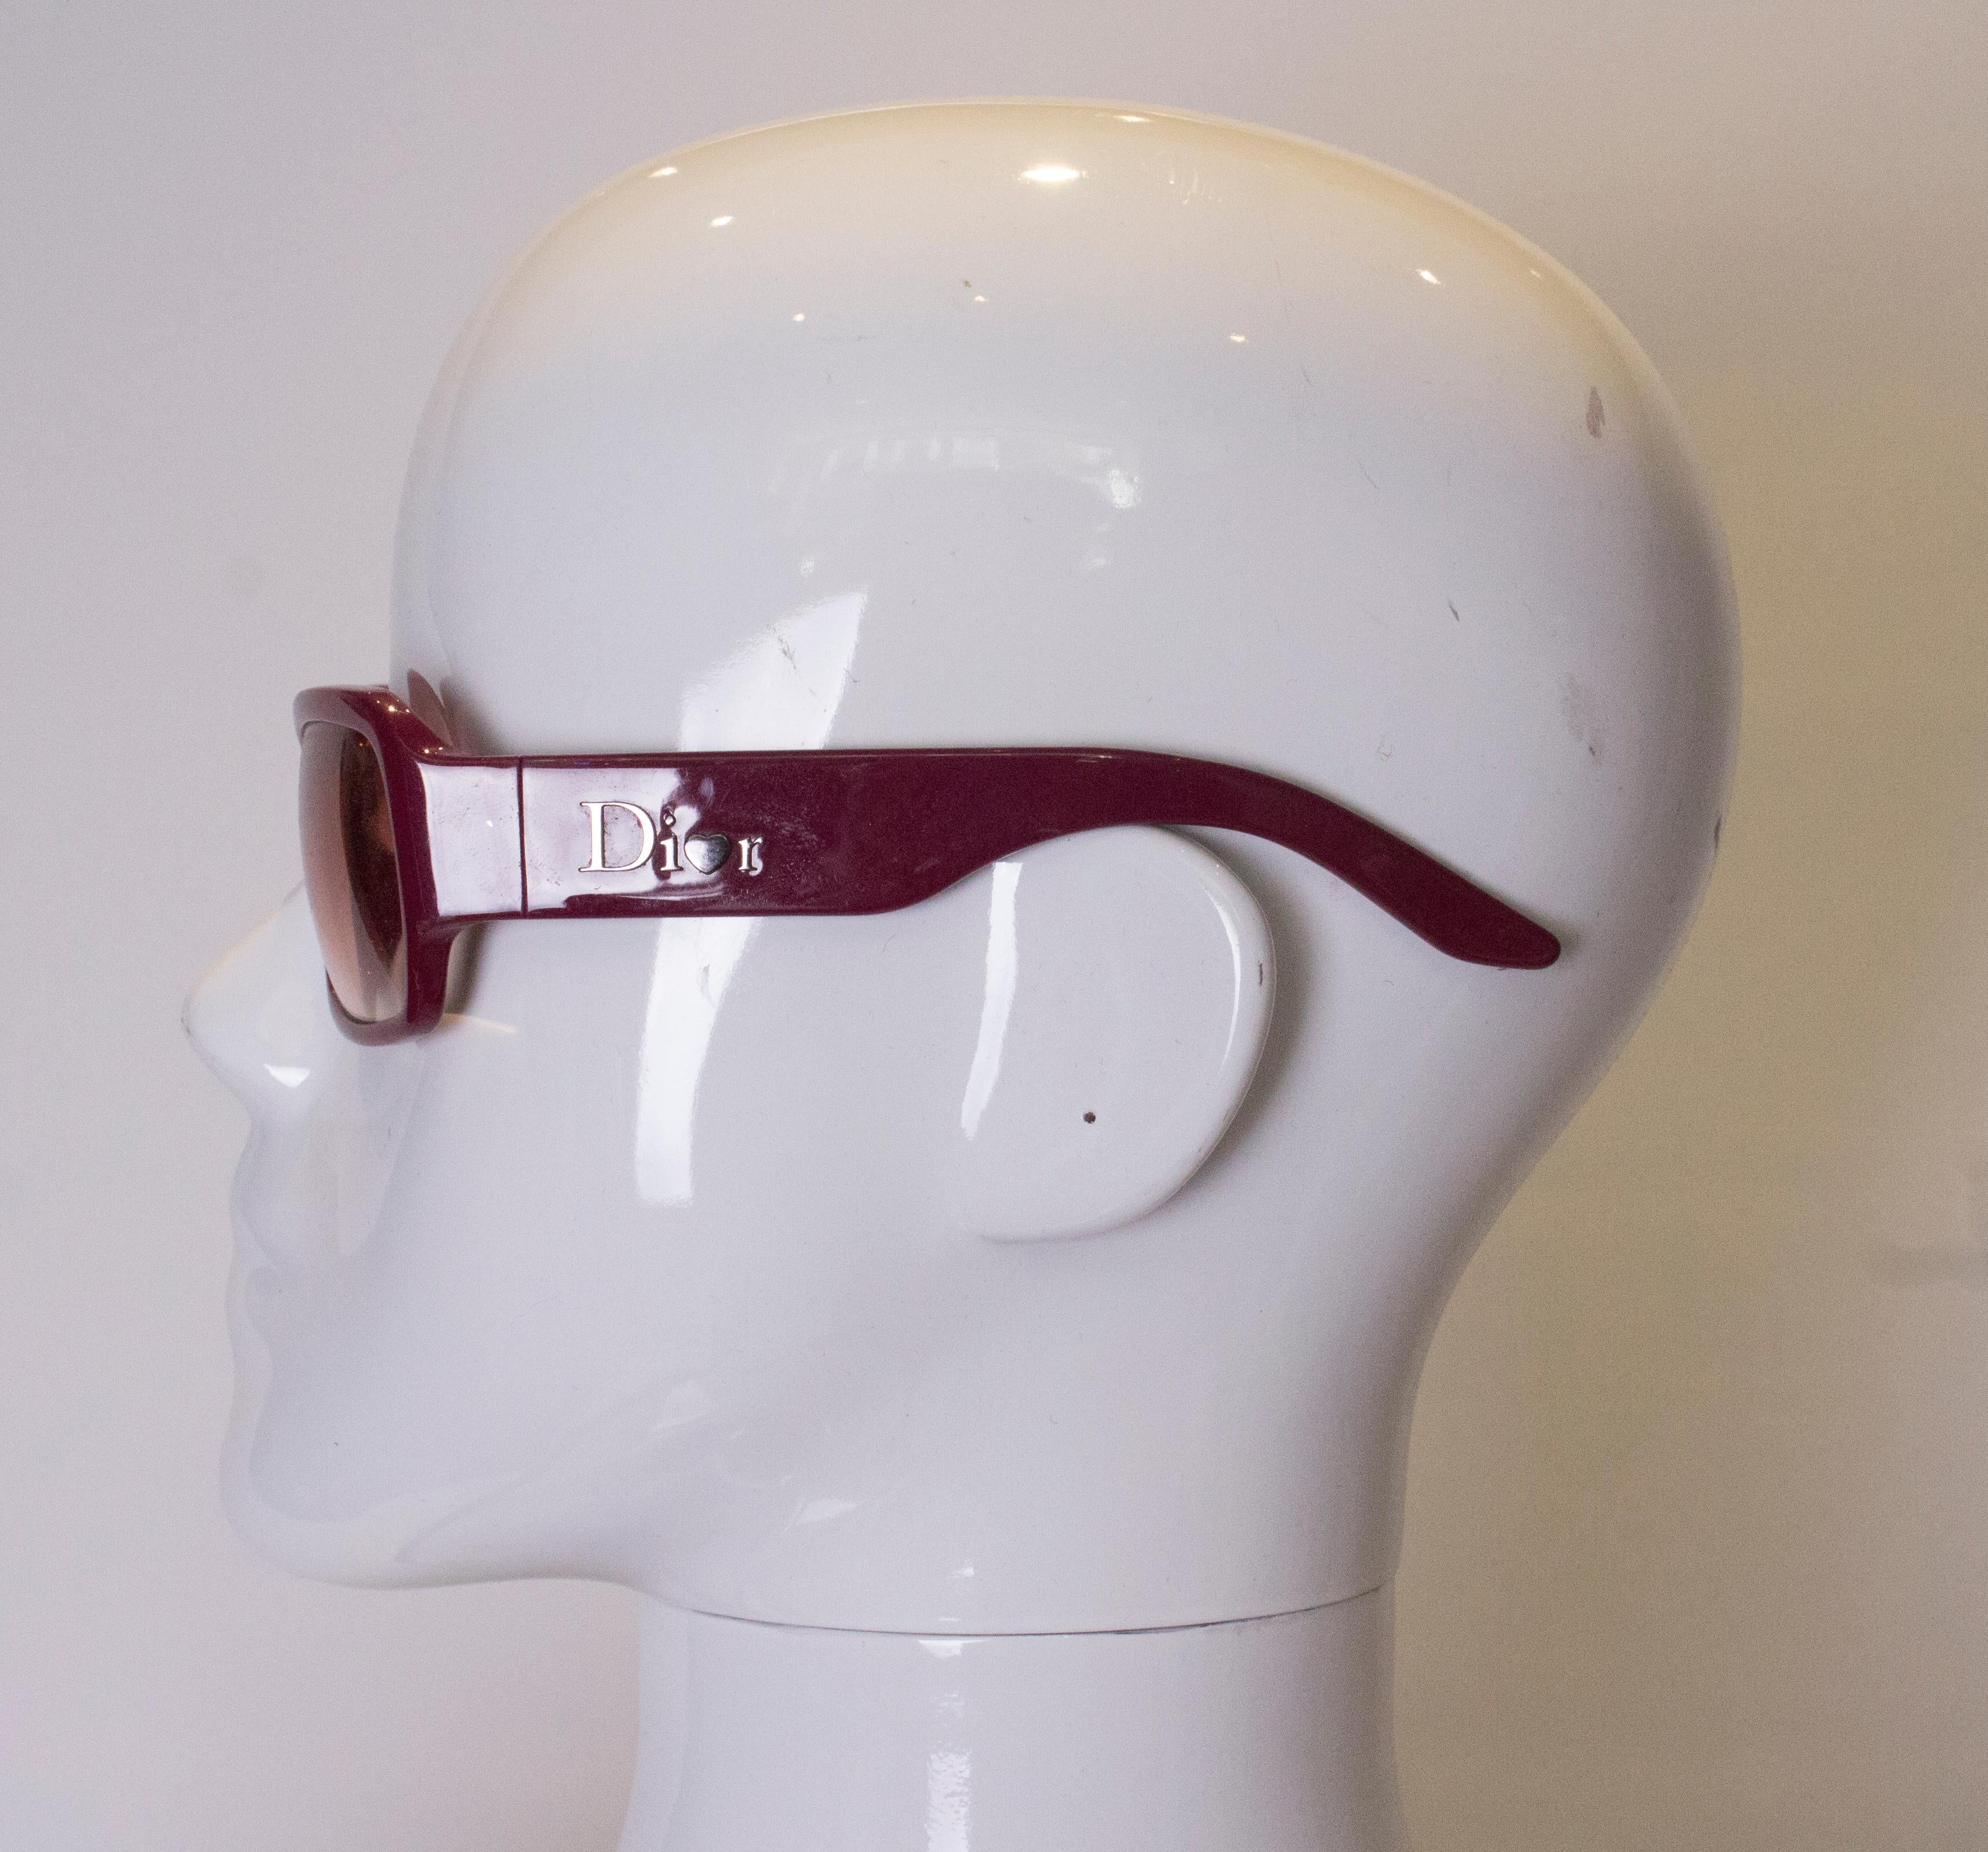 A pair of vintage Dior sunglasses  in a stunning purple colour. The glasses were made in Italy.